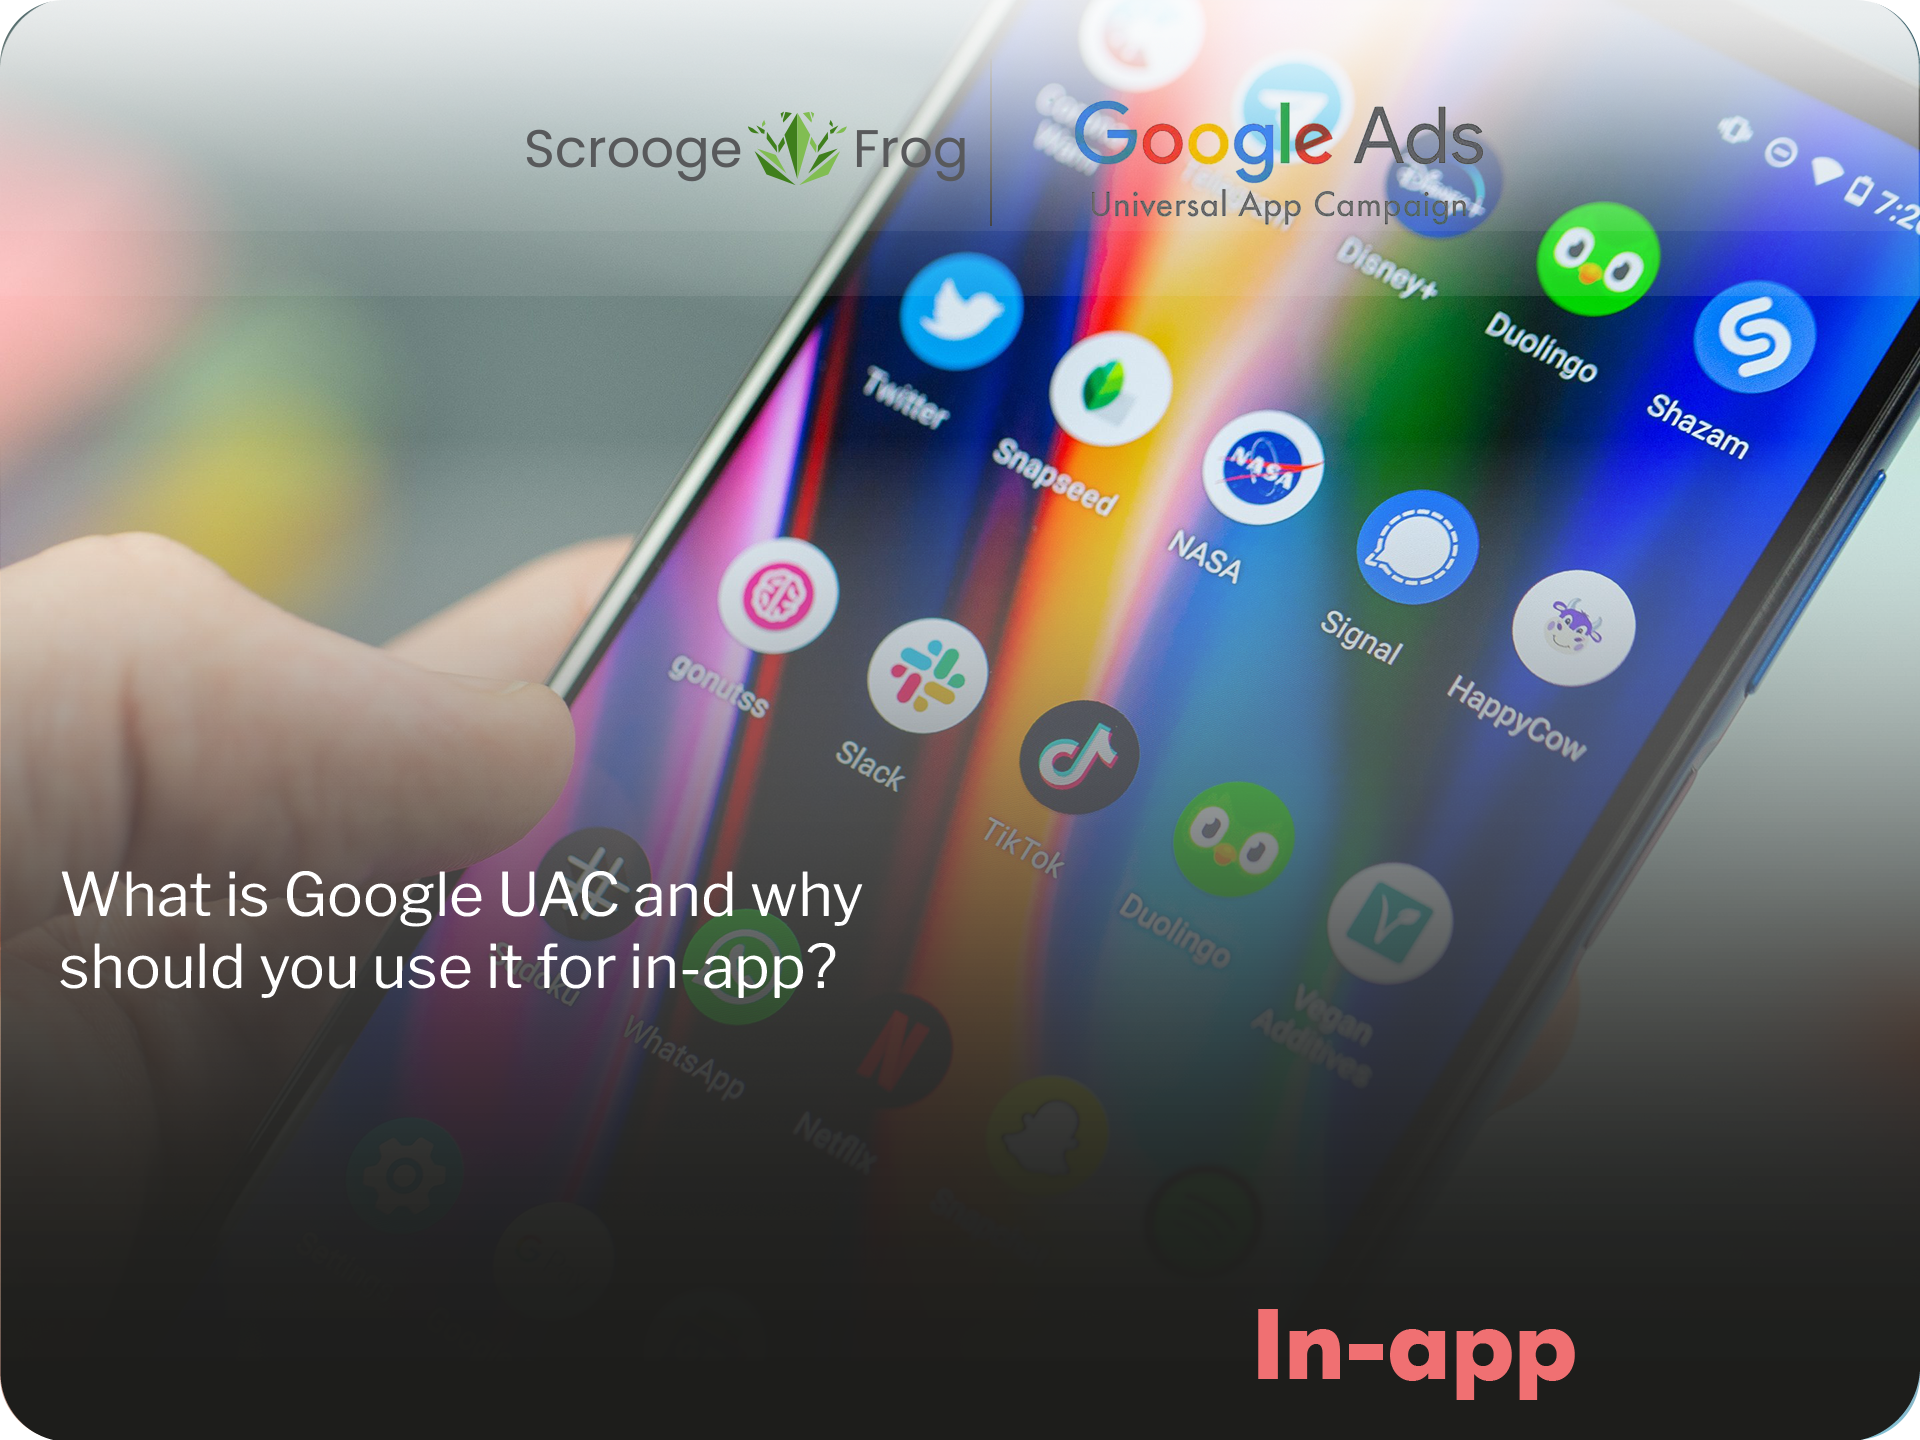 What is Google UAC and why should you use it for in-app?